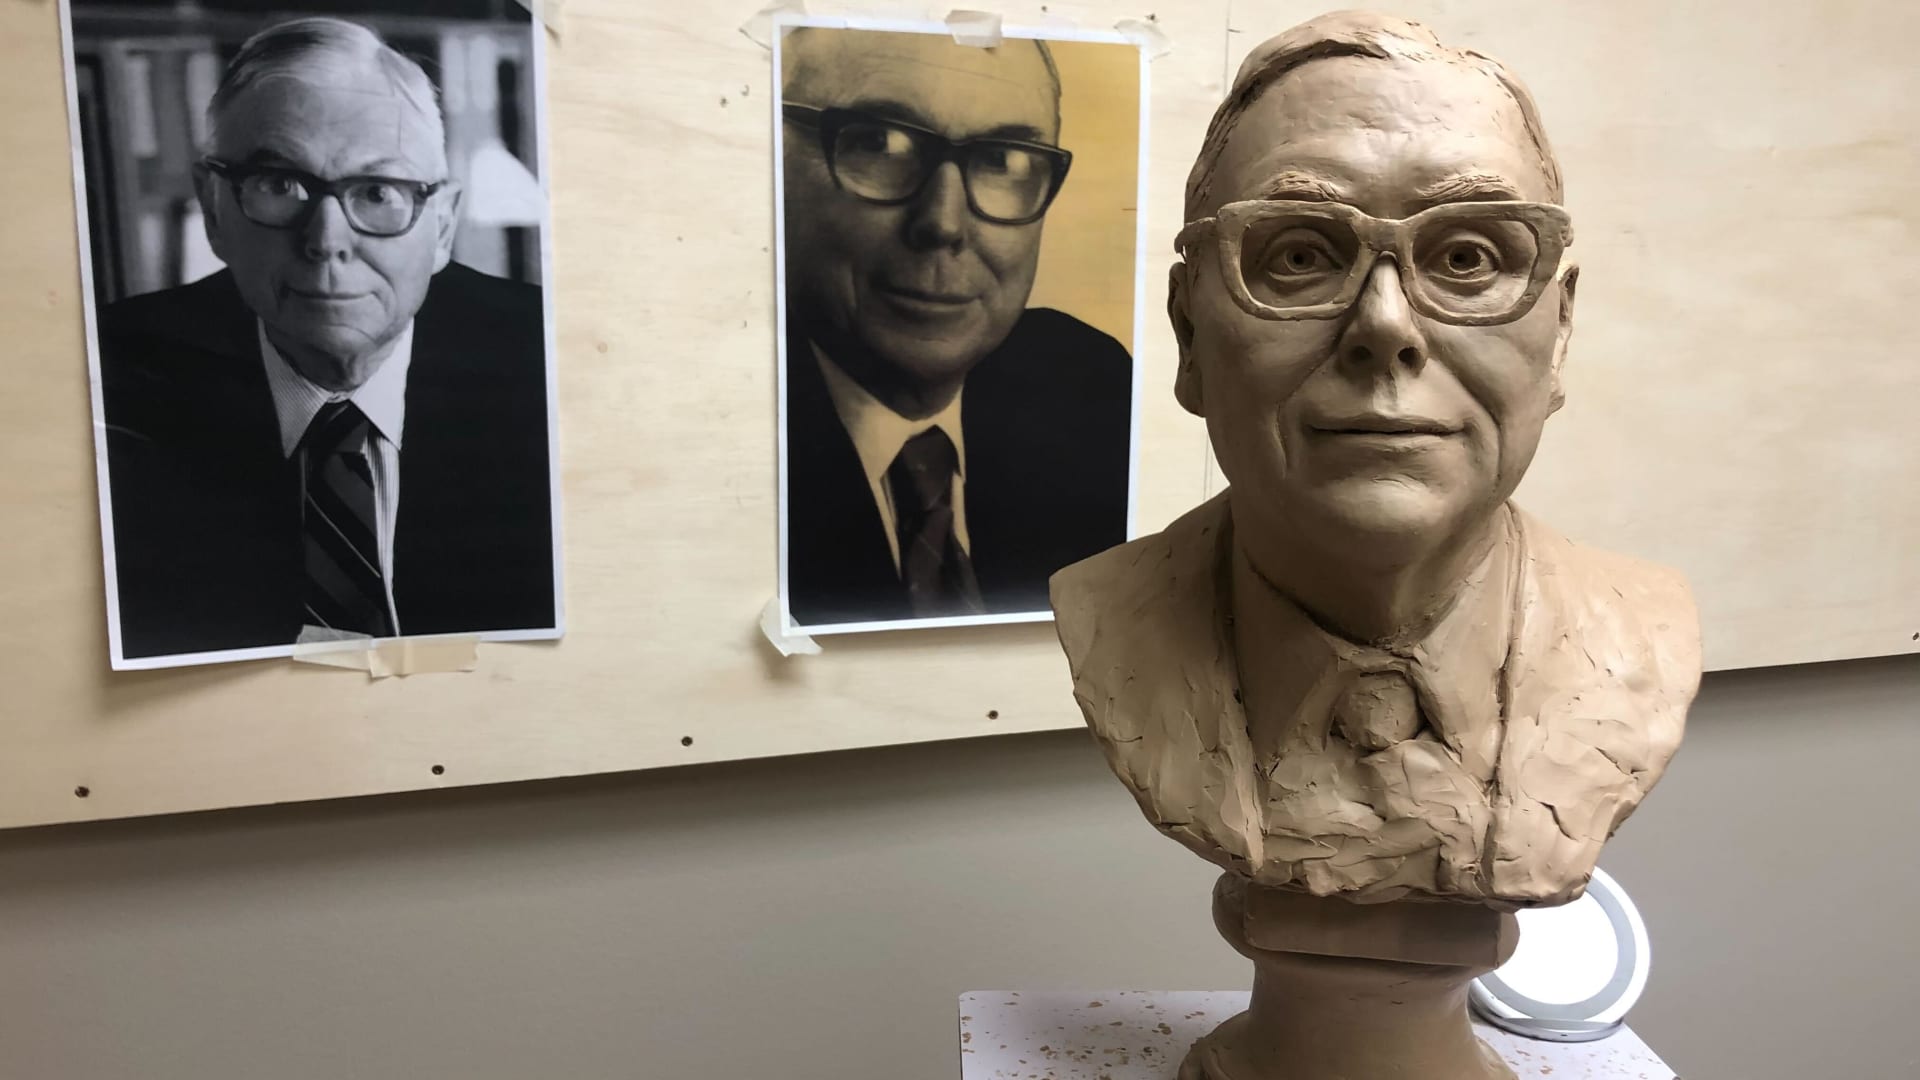 Bronze bust of the late Charlie Munger wowed crowd in Omaha at Berkshire meeting